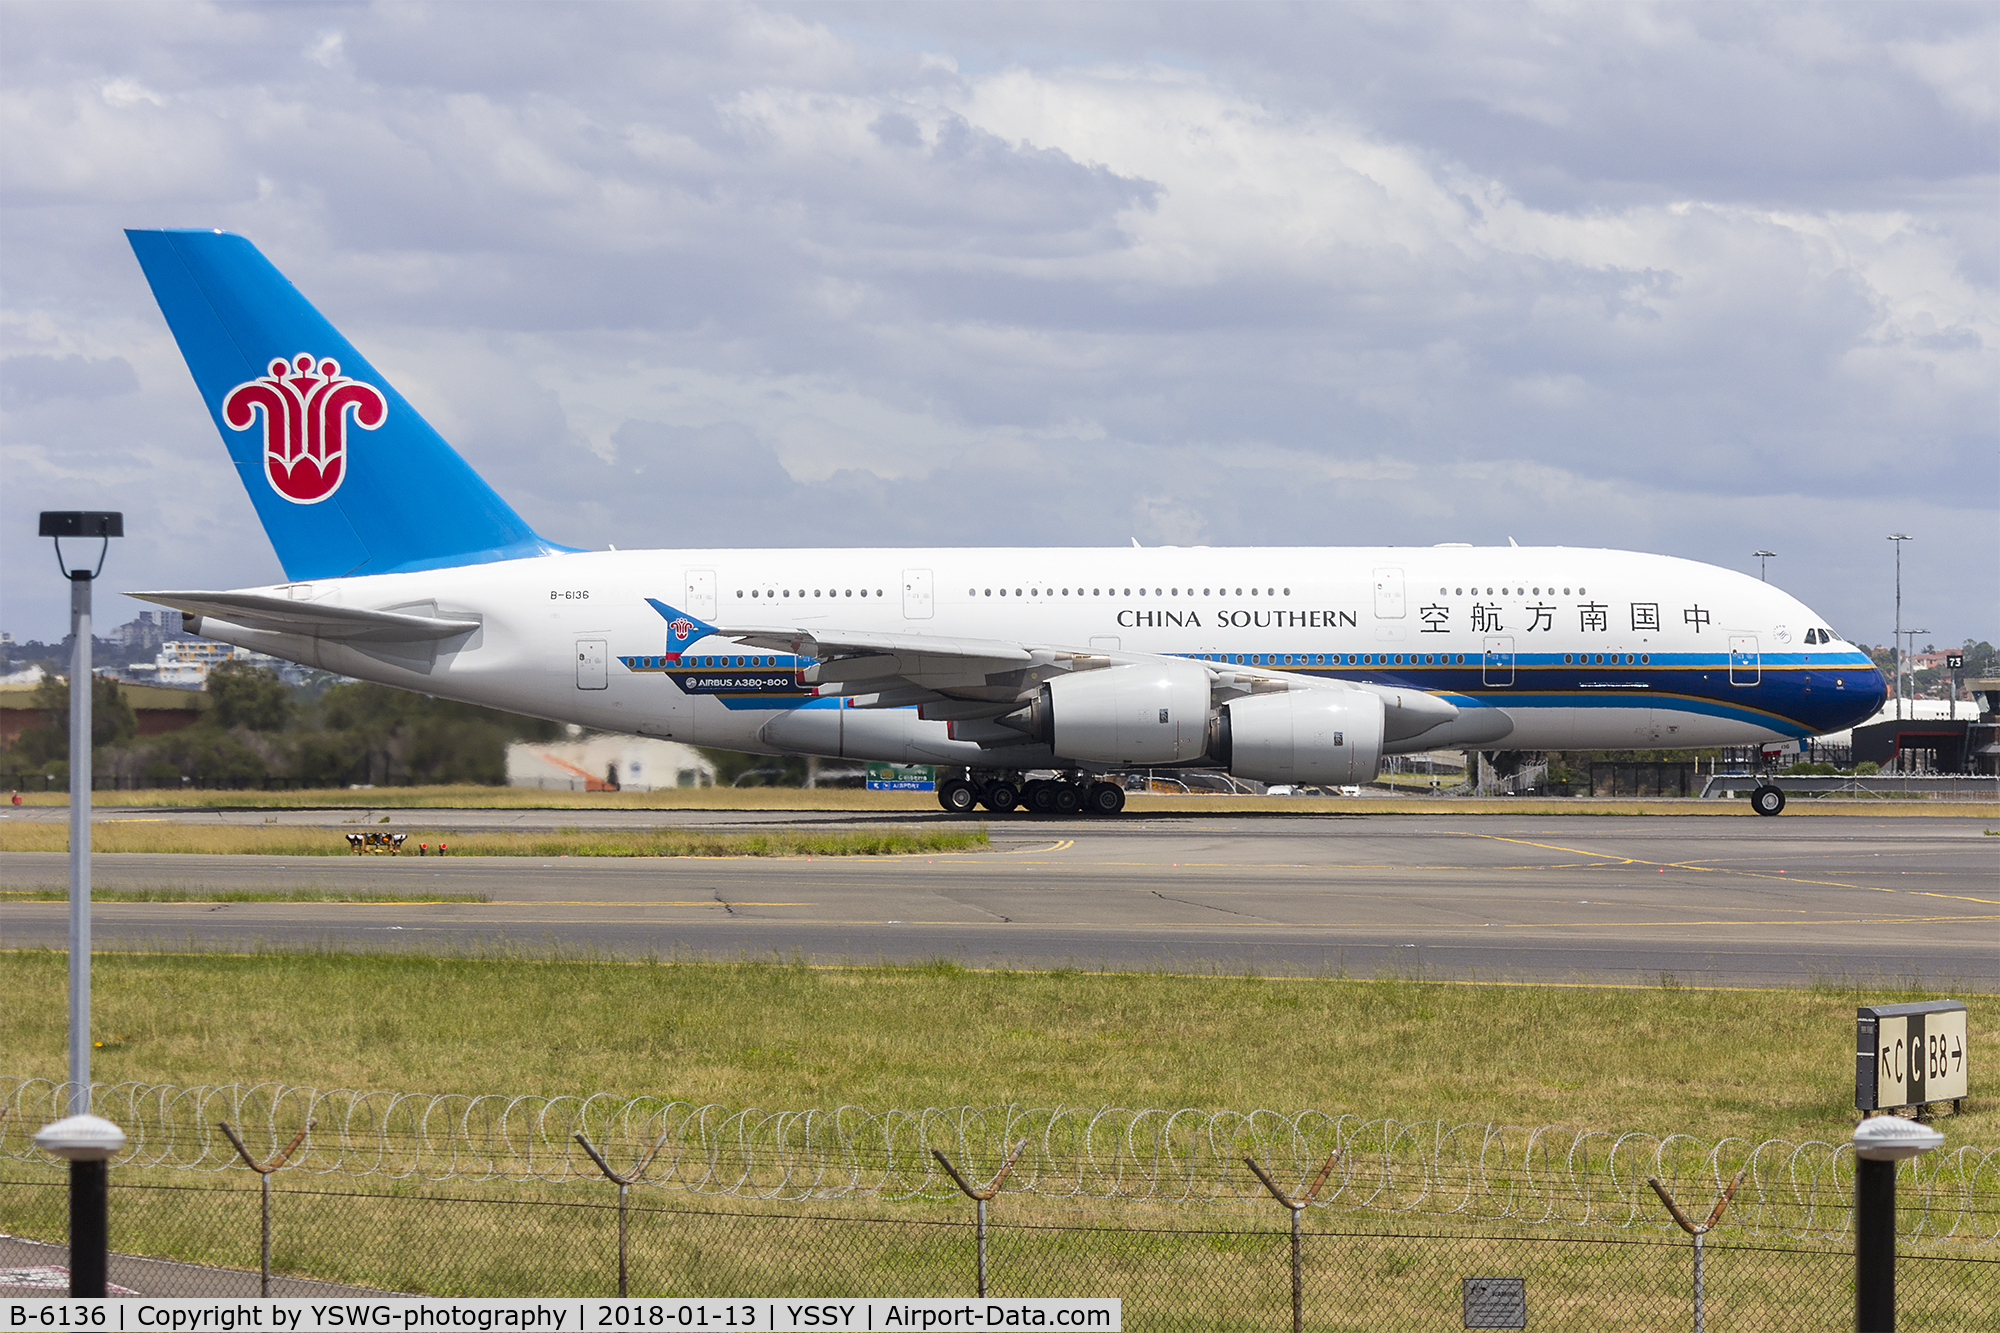 B-6136, 2011 Airbus A380-841 C/N 031, China Southern Airlines (B-6136) Airbus A380-841 departing Sydney Airport